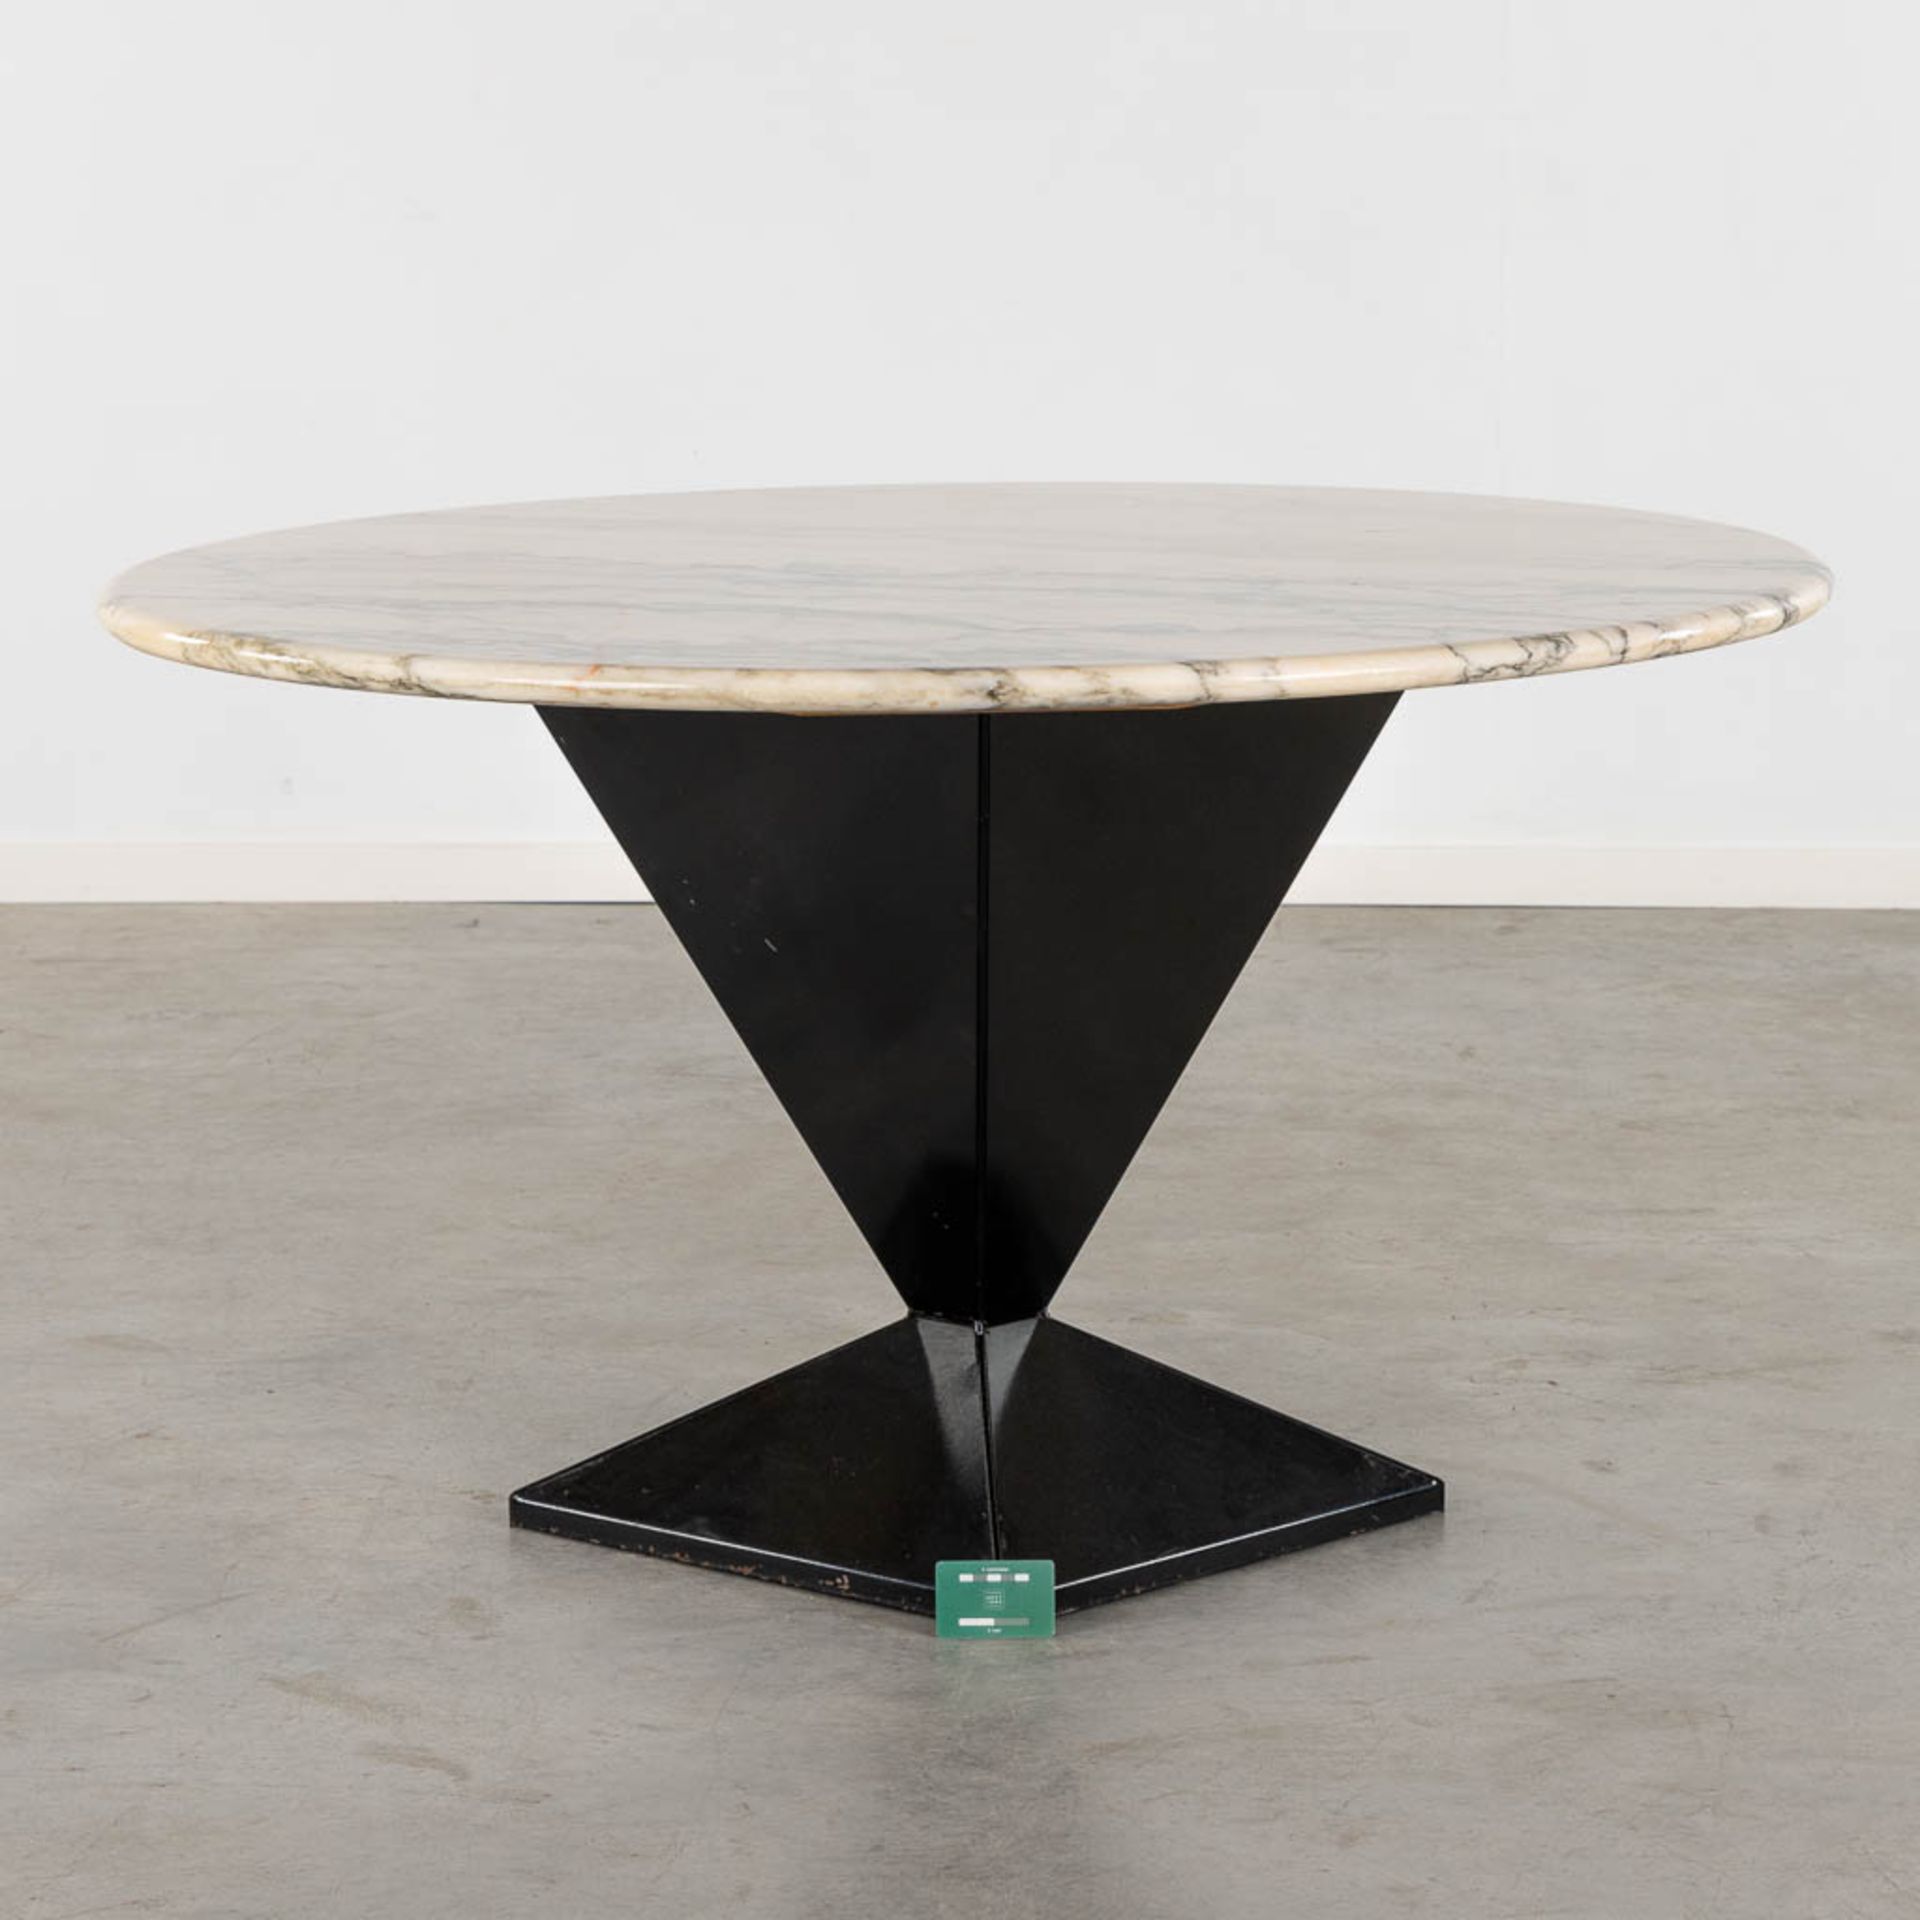 A mid-century table with marble top and a patinated metal base. Circa 1960-1970. (H:73 x D:130 cm) - Image 2 of 9